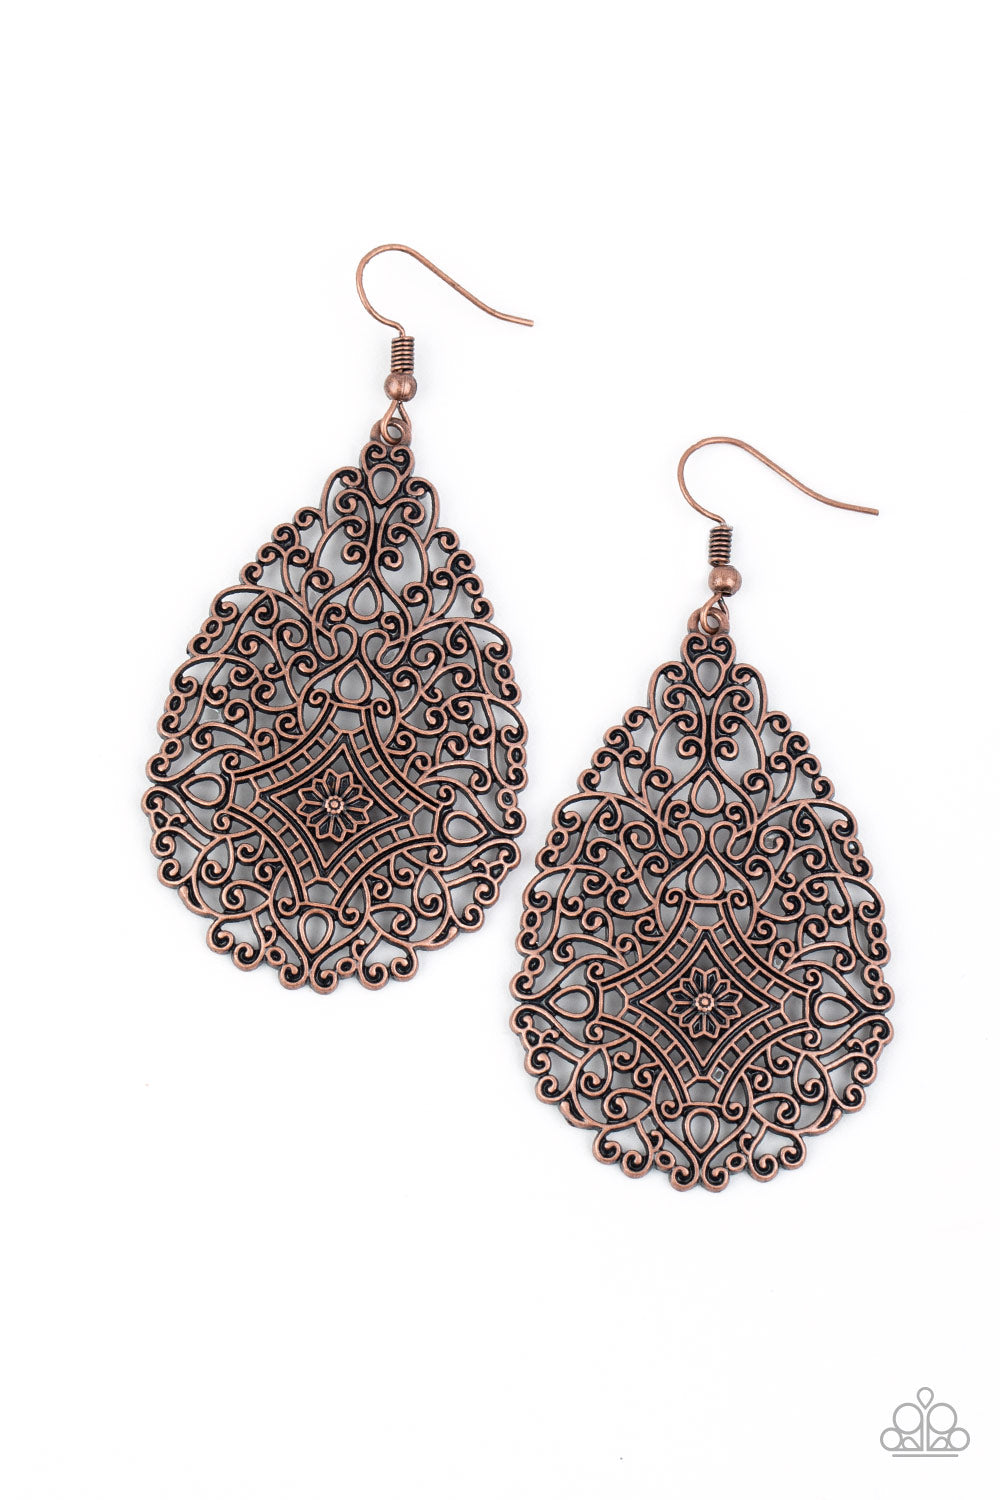 paparazzi-accessories-napa-valley-vintage-copper-earrings